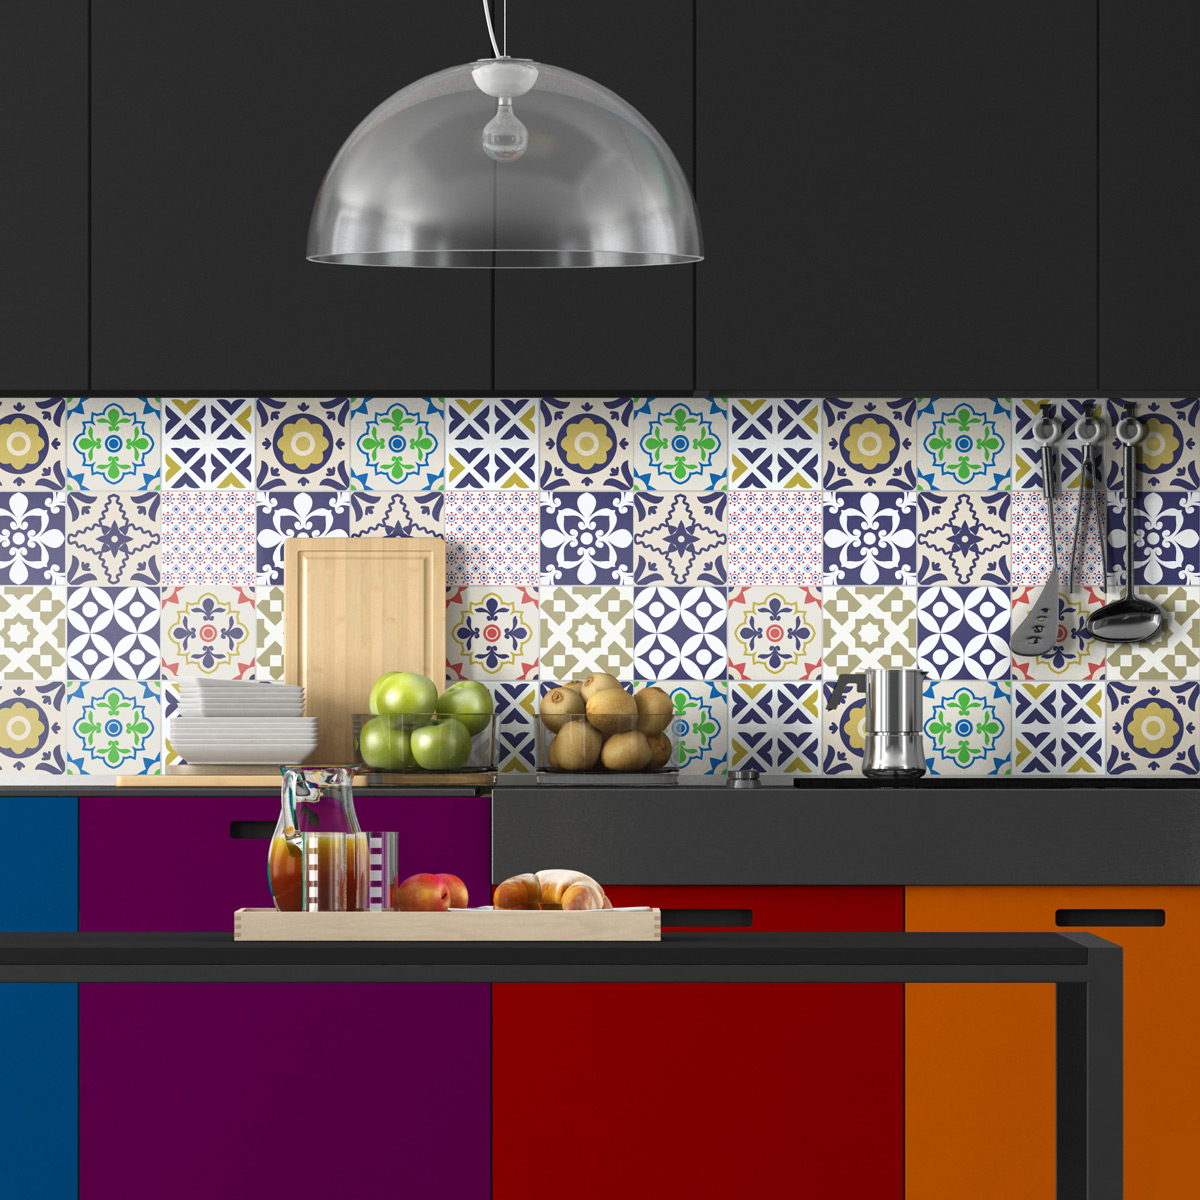 9 wall stickers cement tiles azulejos don chao